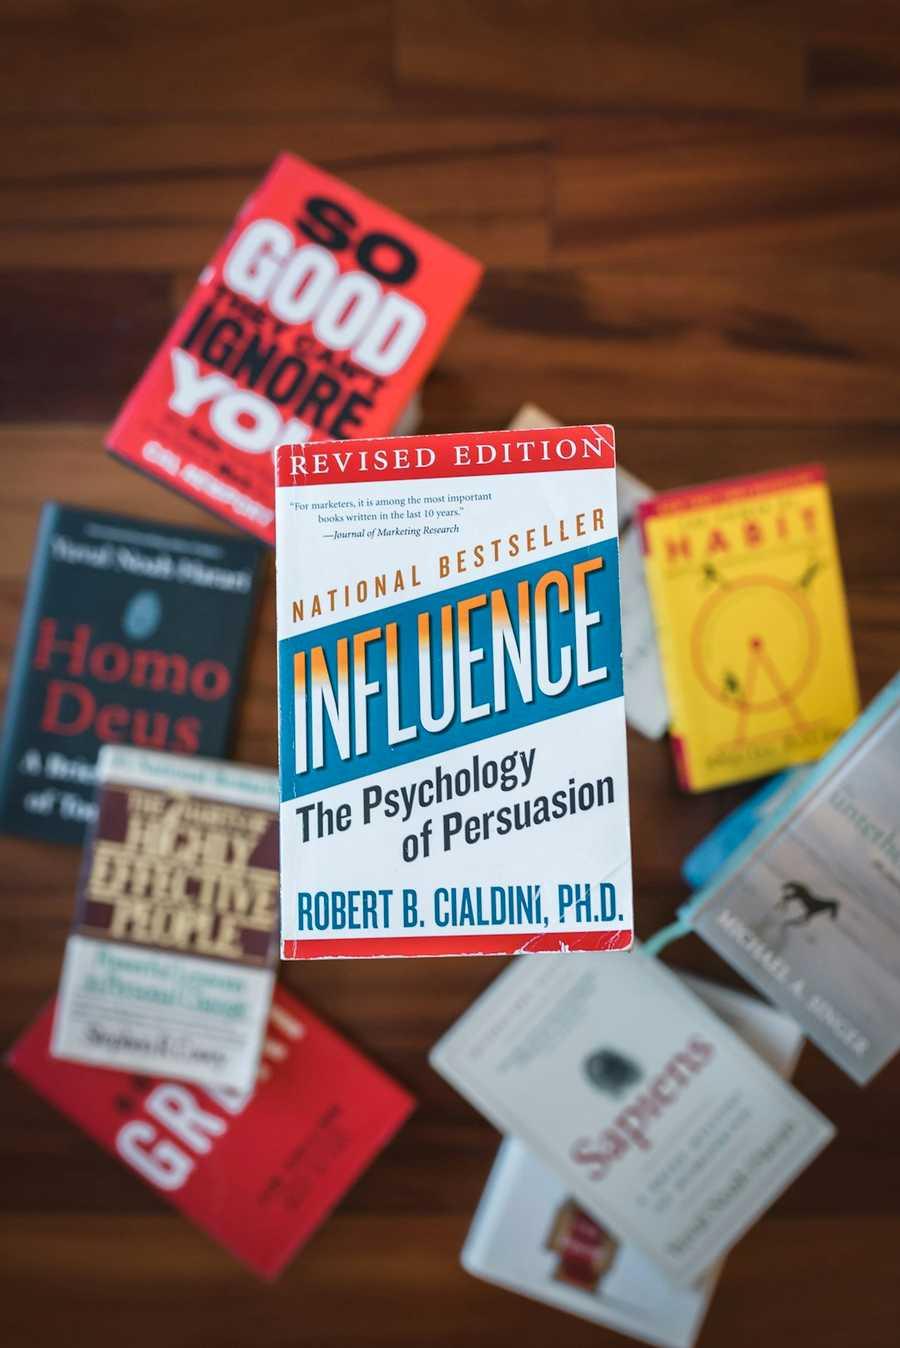 Weapons of Influence